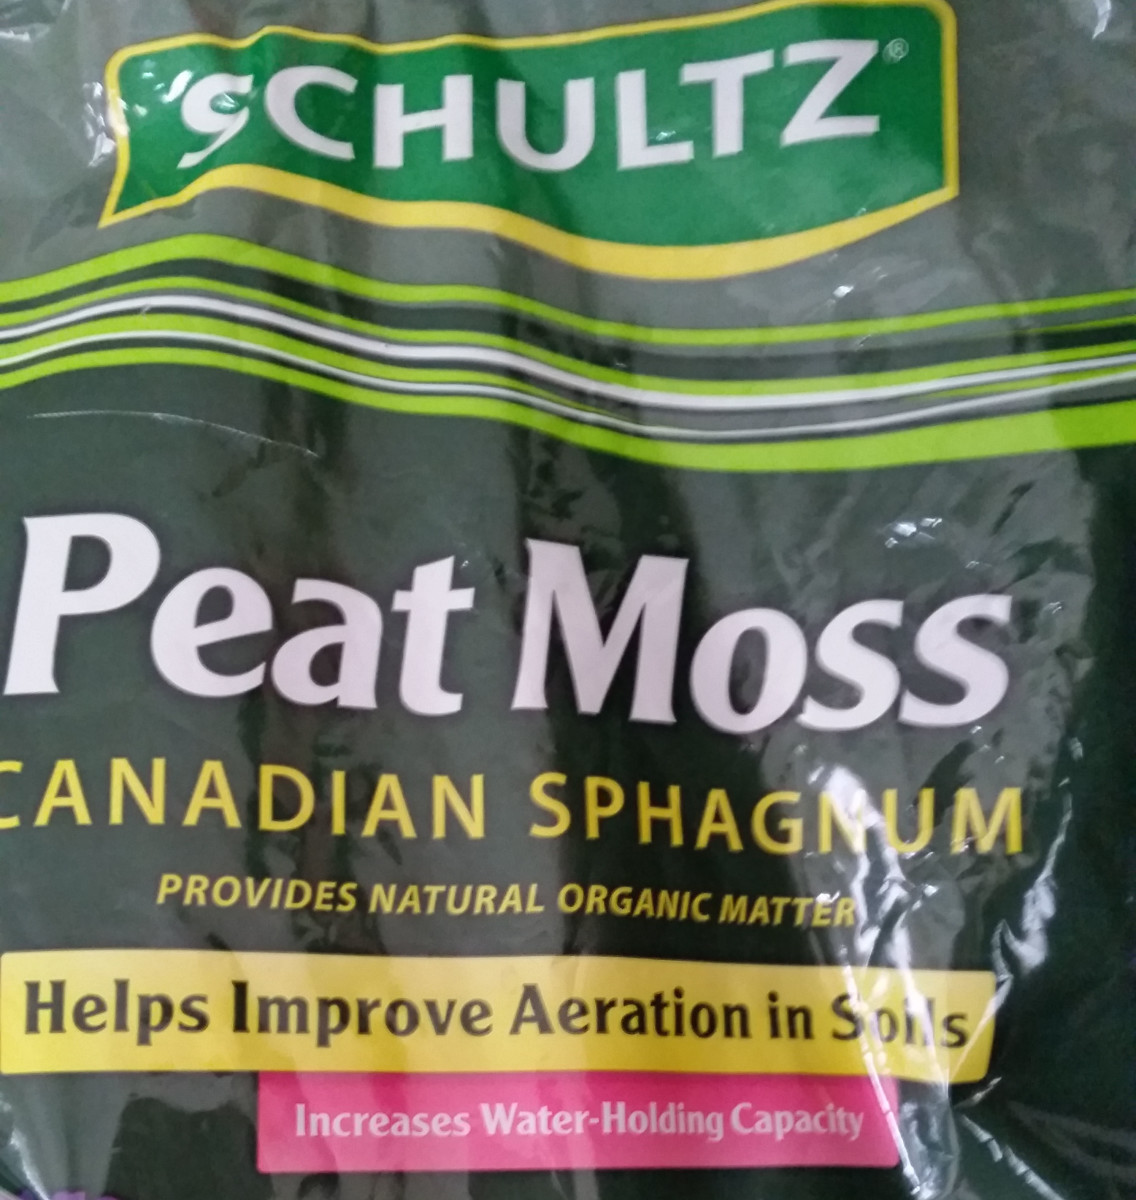 Peat Moss: This brand has no chemicals and can be found at nearly any hardware store. I purchased this at Menard's.